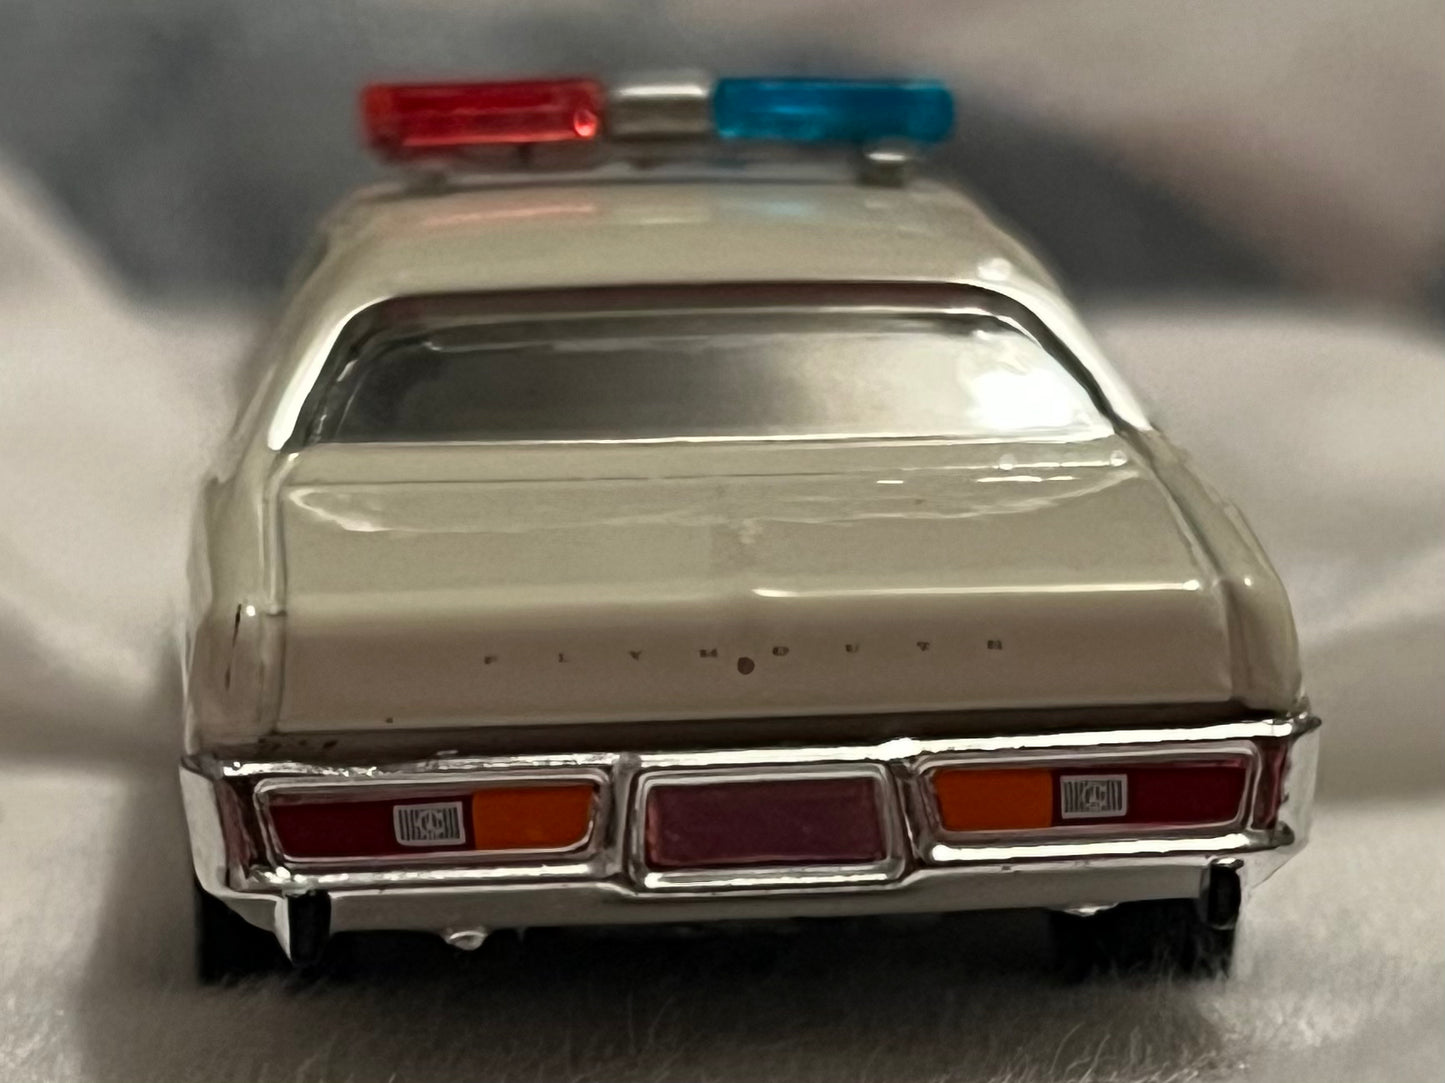 1:64 1977 Plymouth Fury - Hazzard County Sheriff (Hobby Exclusive) **RETIRED ITEM**